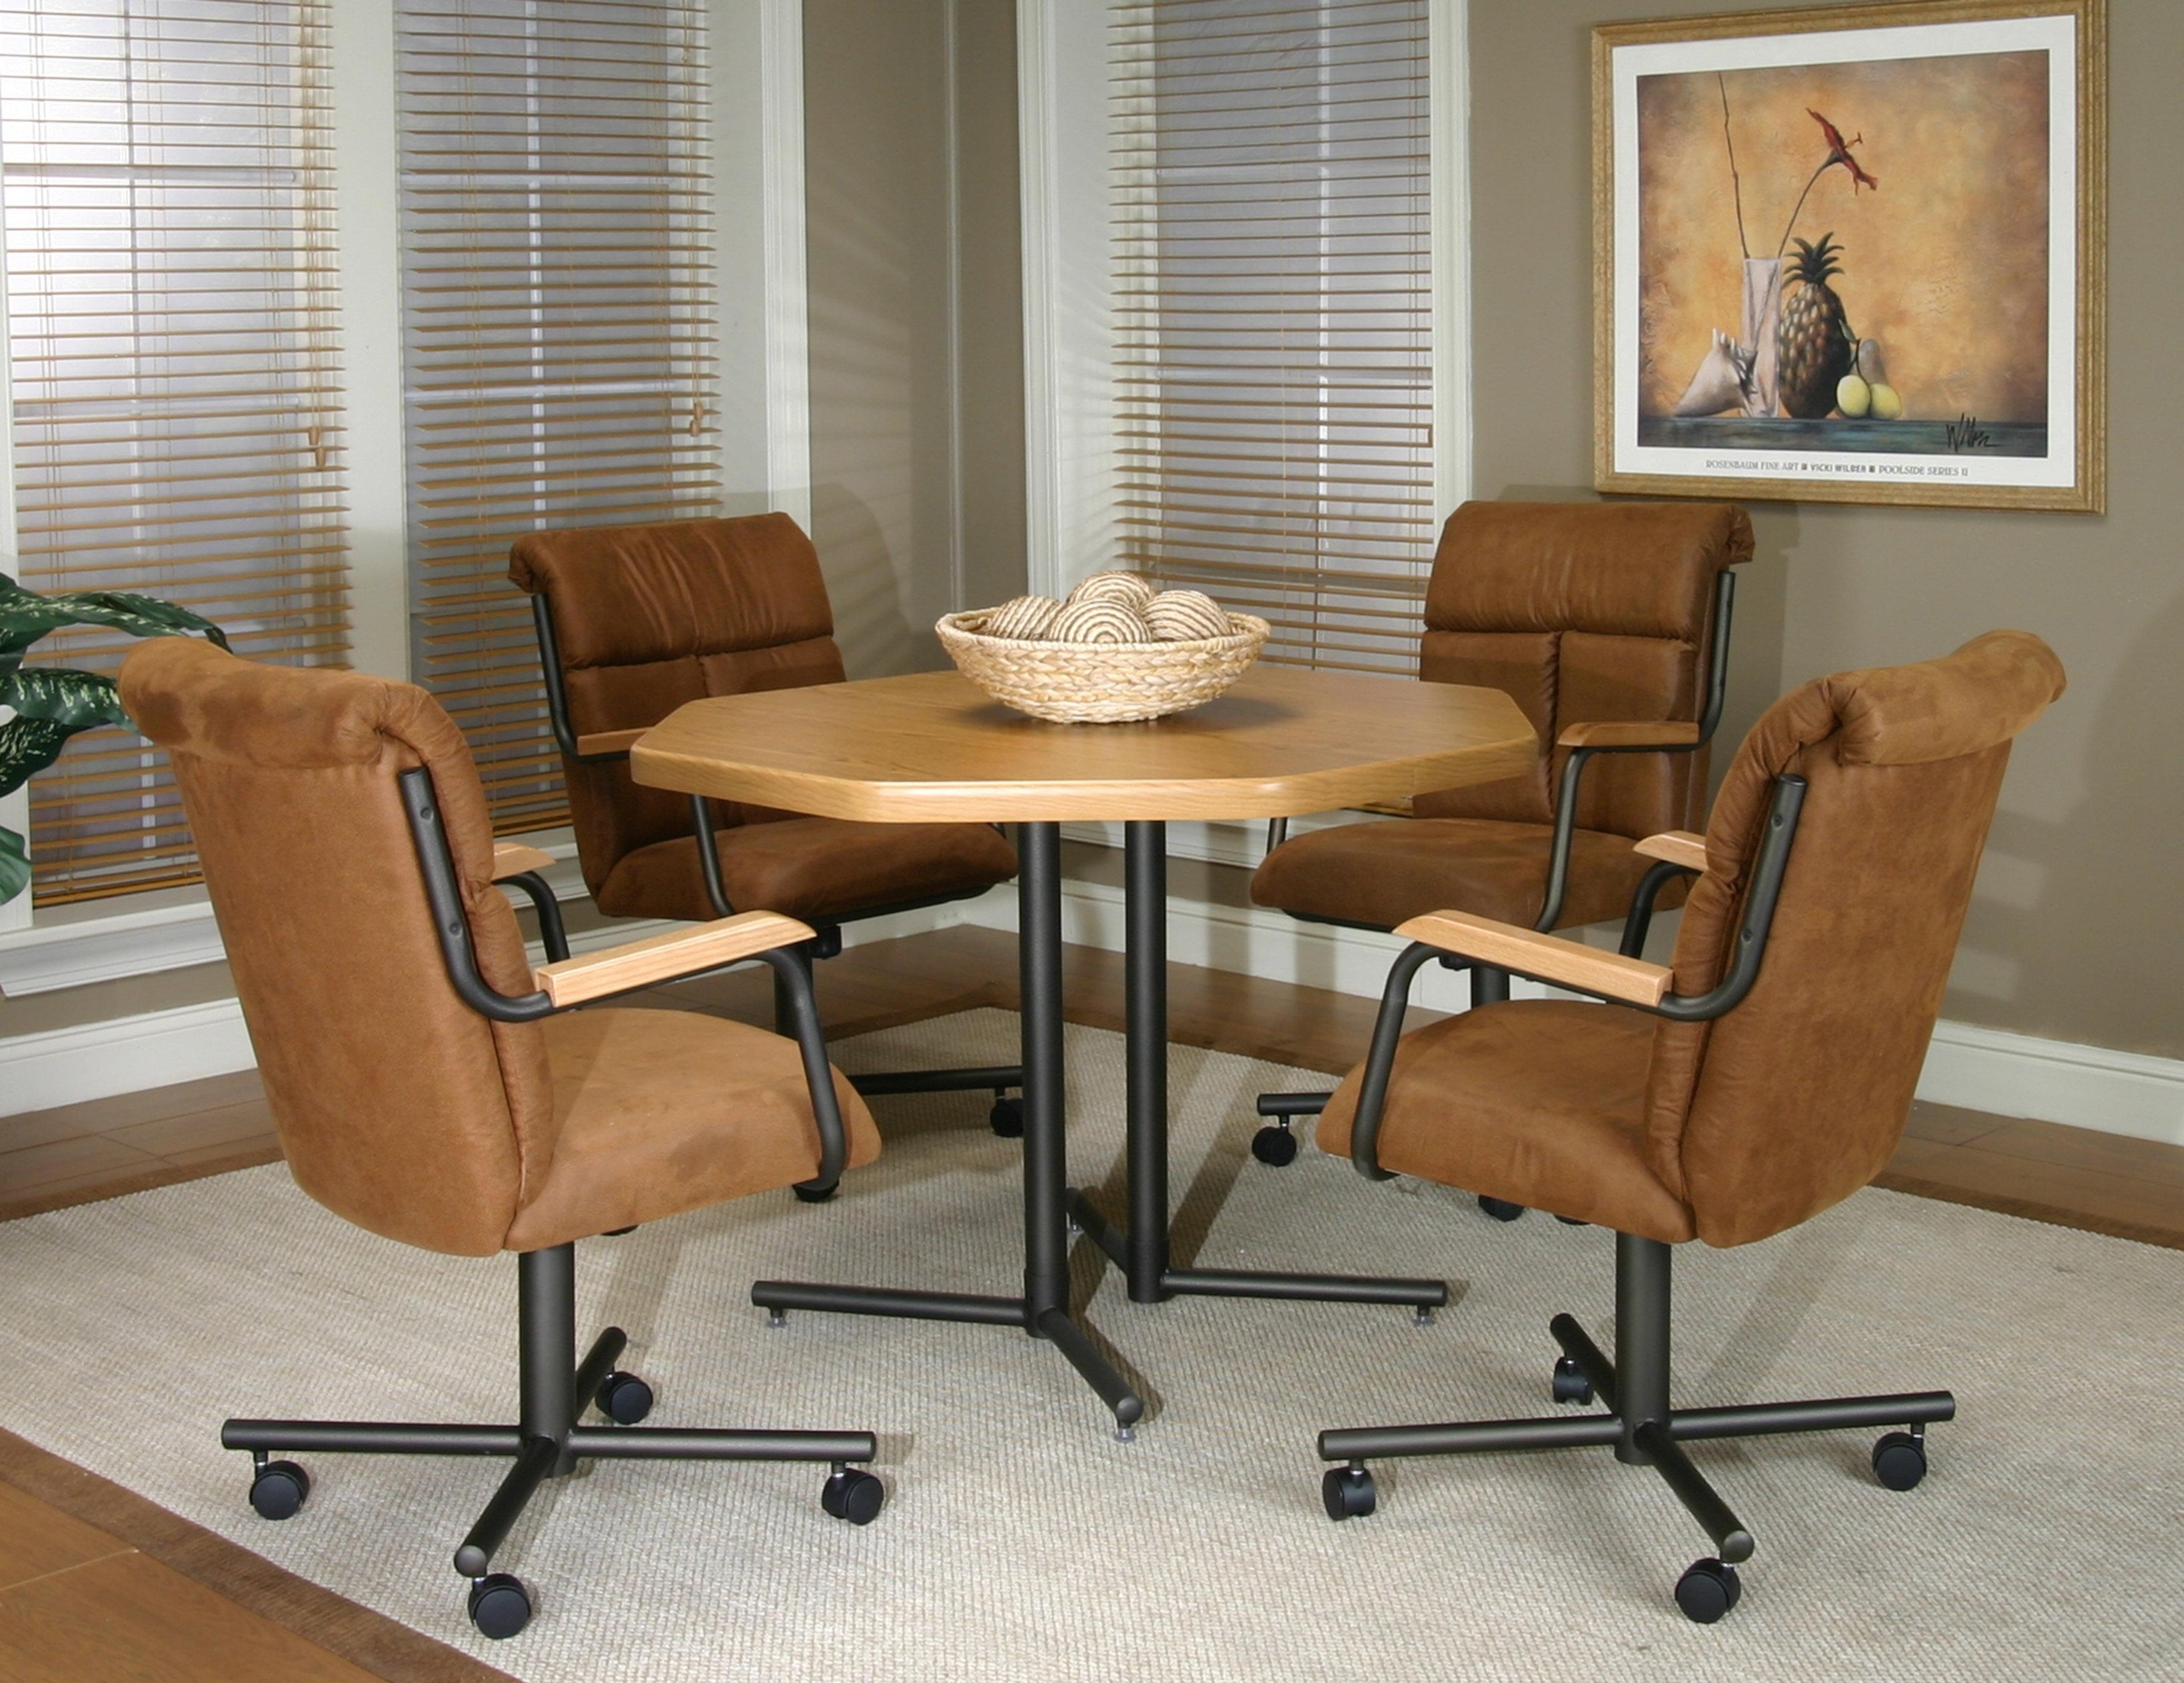 Dining Chairs With Casters You Ll Love, Padded Dining Room Chairs With Casters